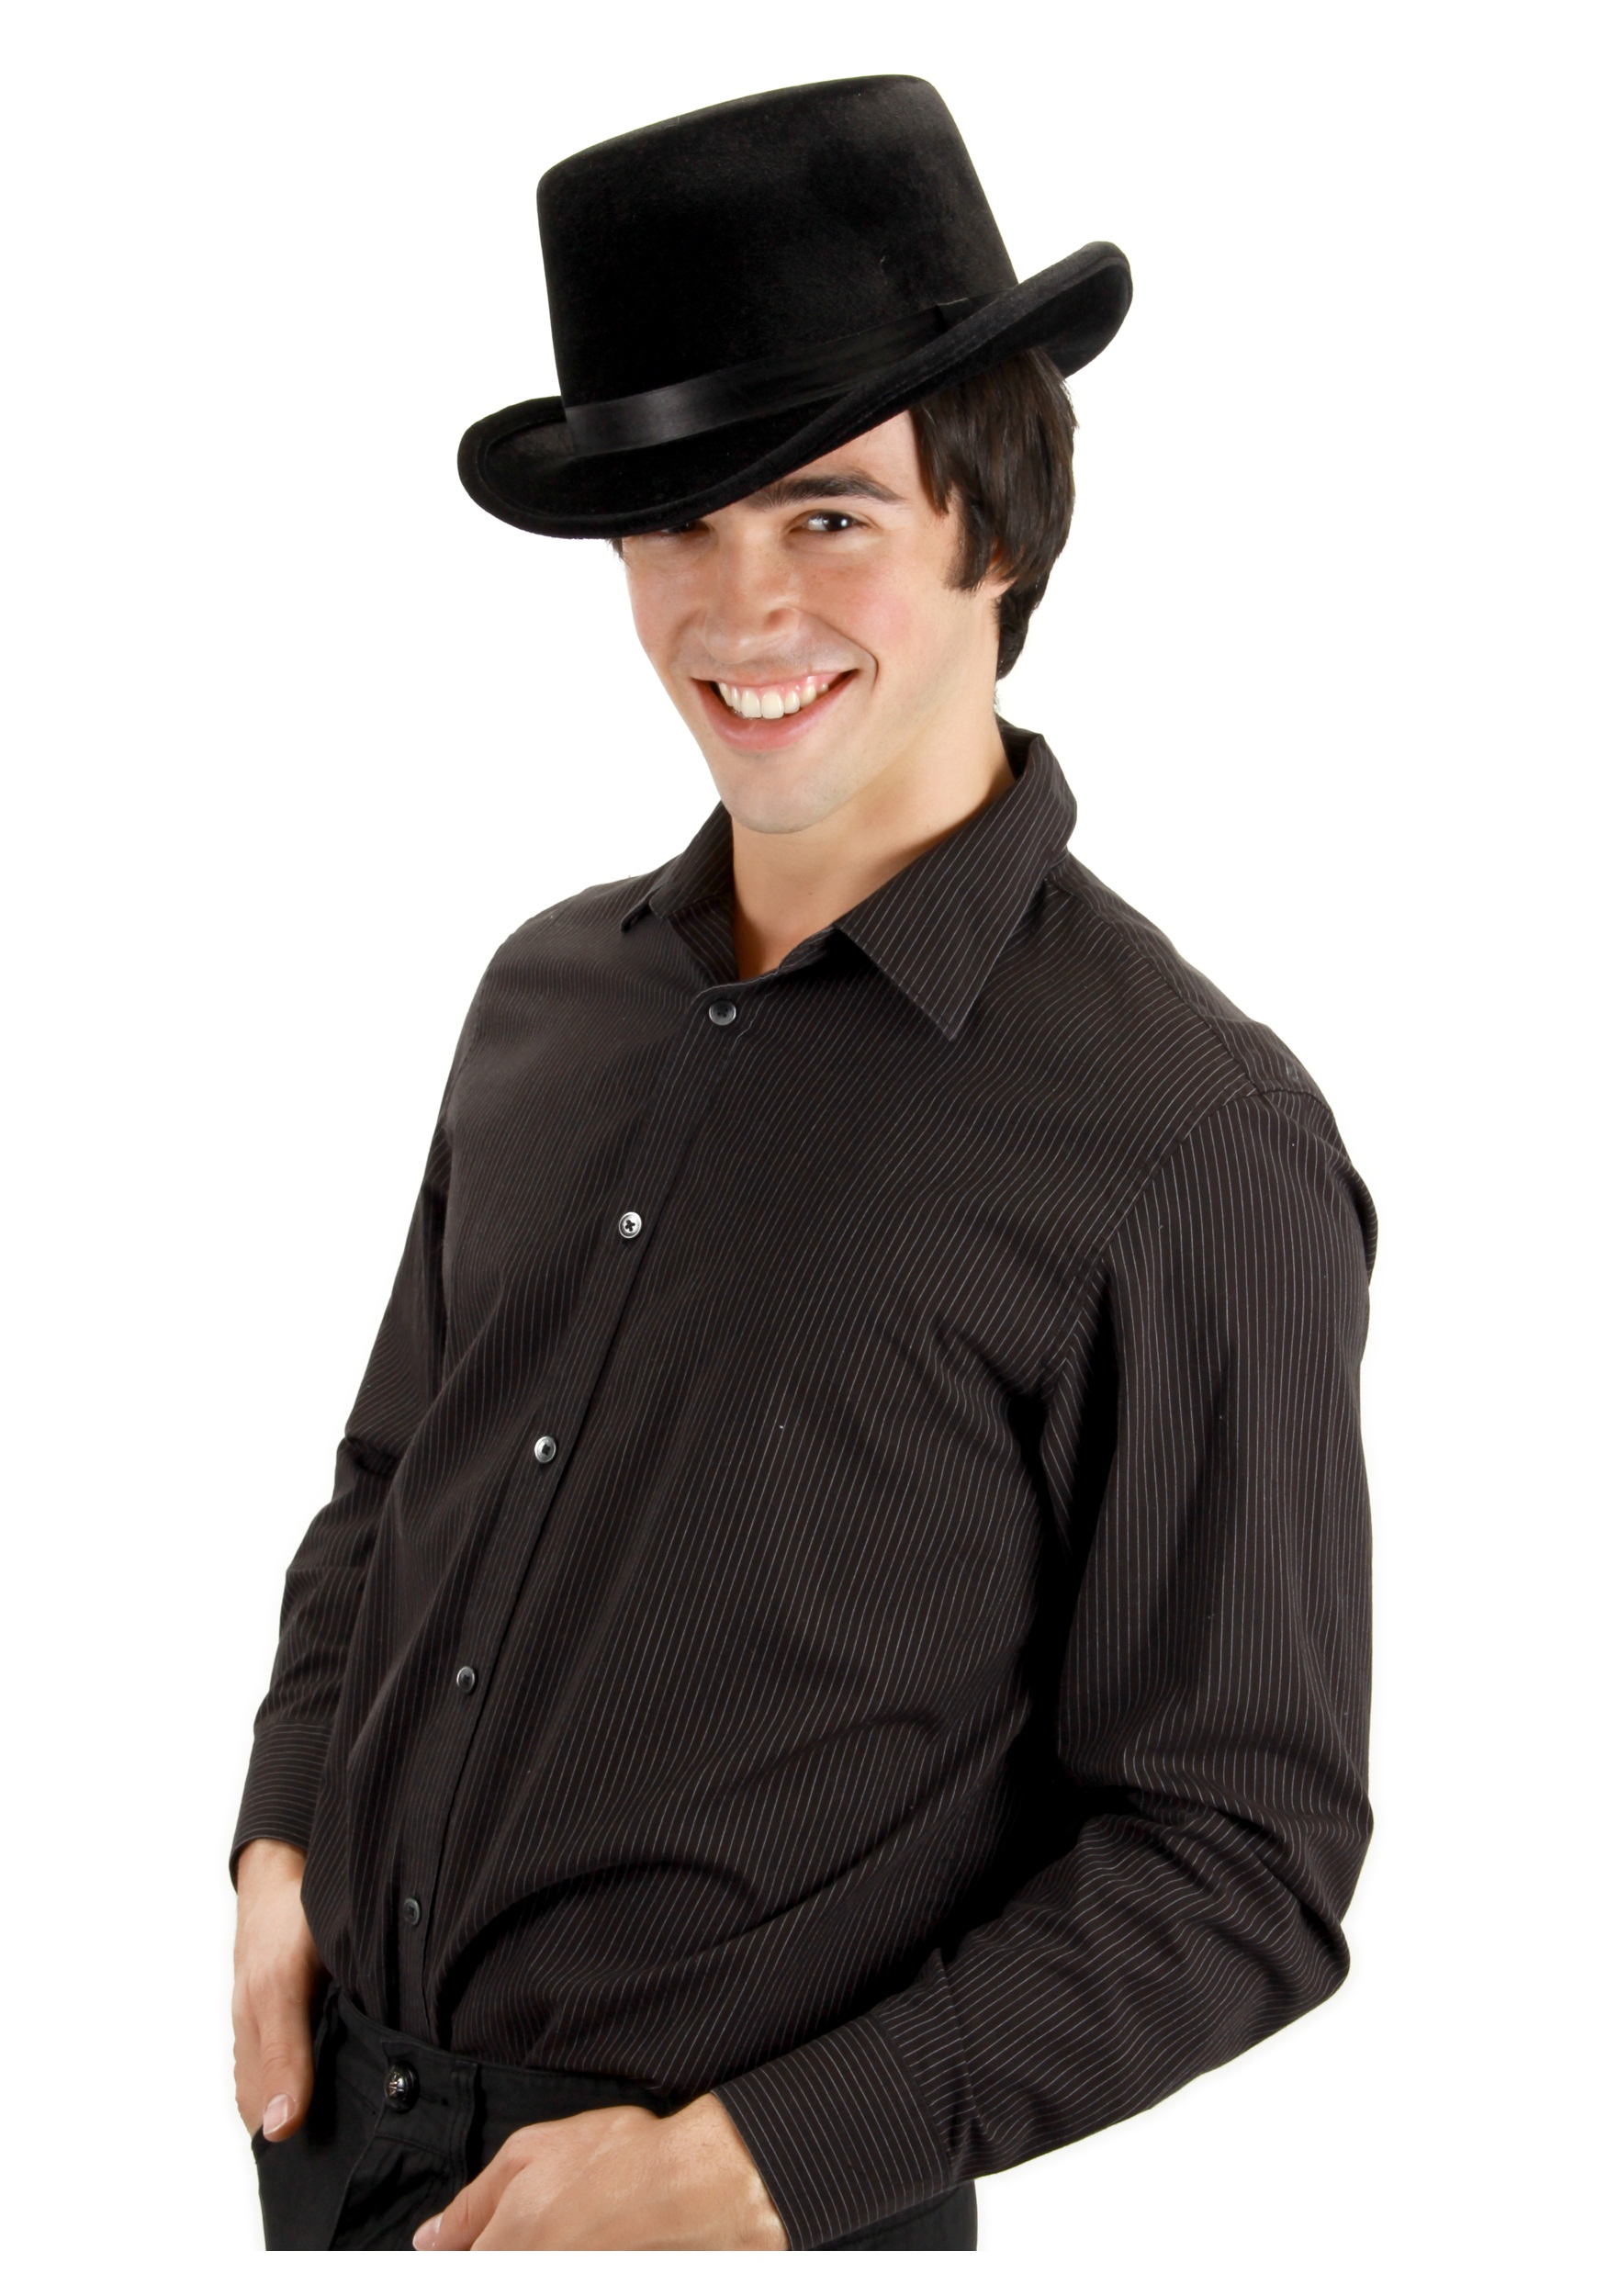 Top Costume Hat Black For Adult